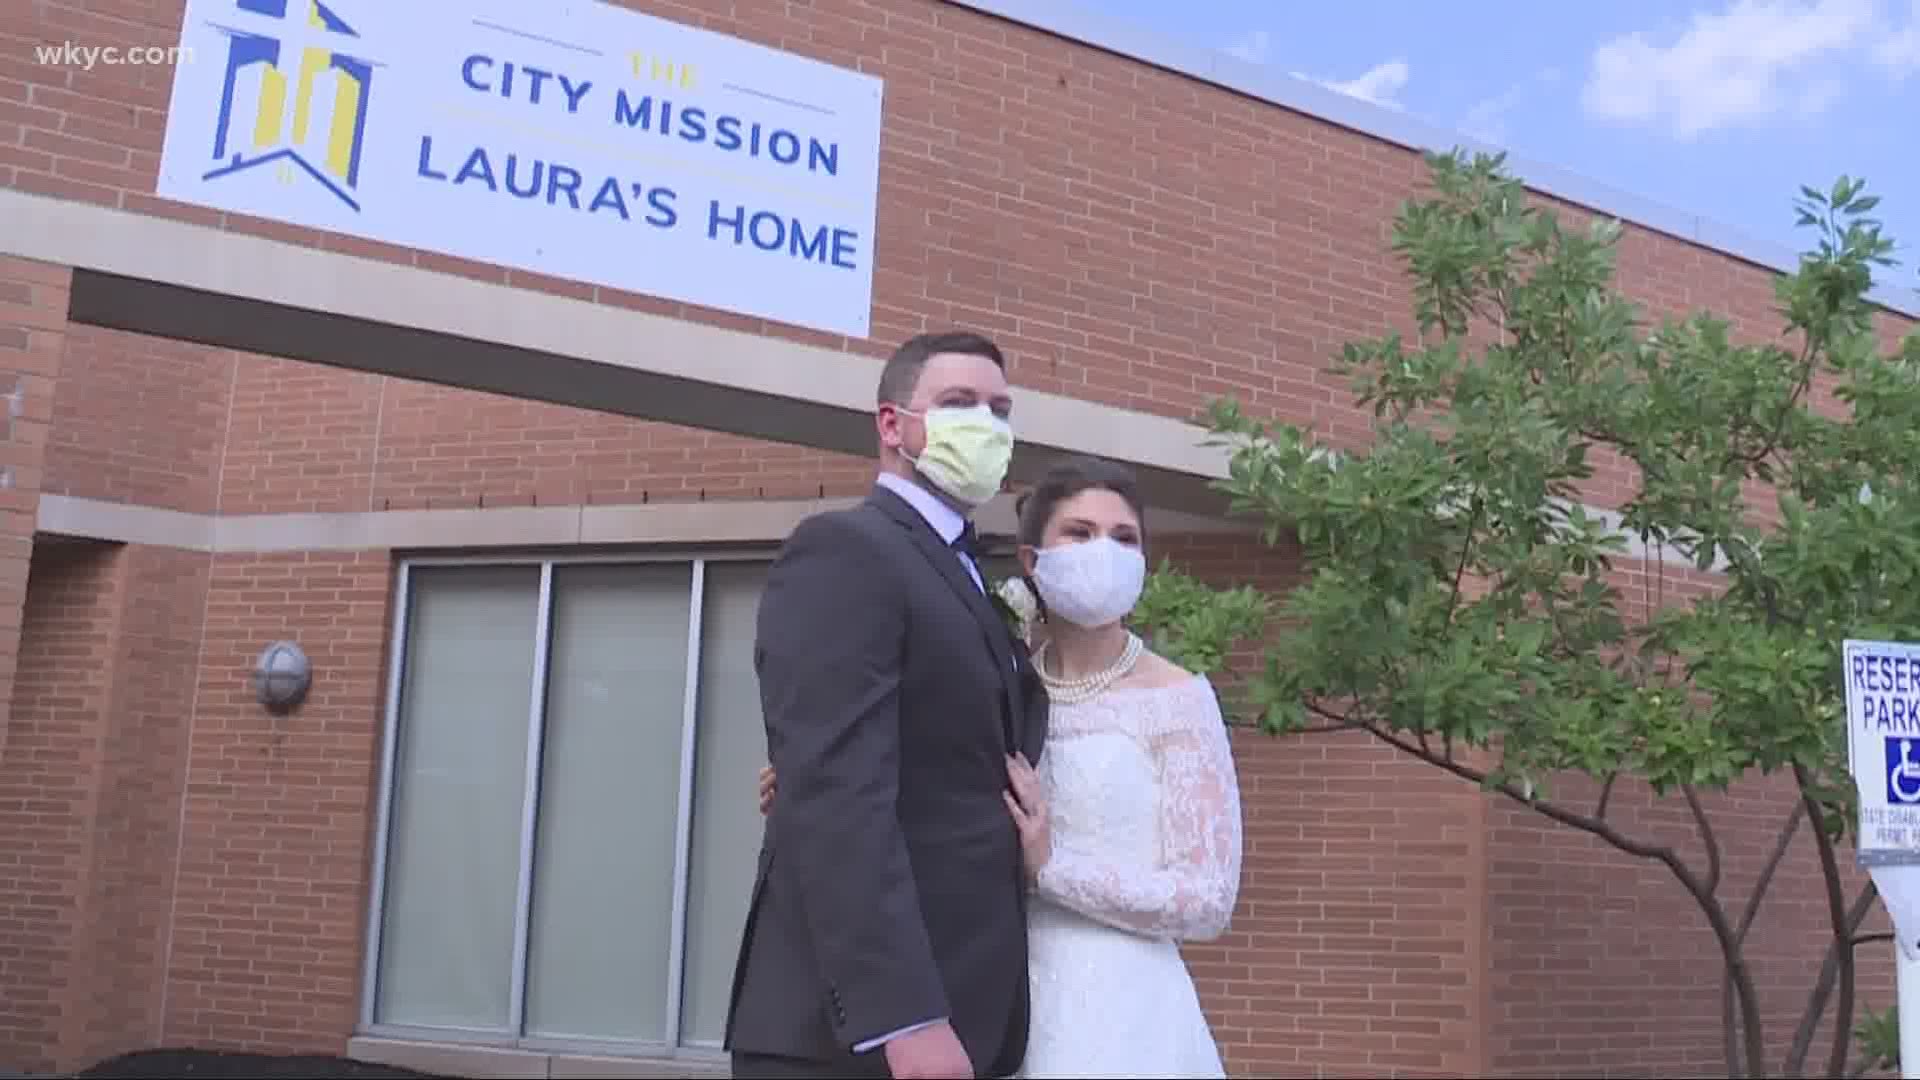 Tyler and Melanie Tapajna exchanged vows in a small backyard ceremony. They then headed to The City Mission to serve the food to women and children in crisis.